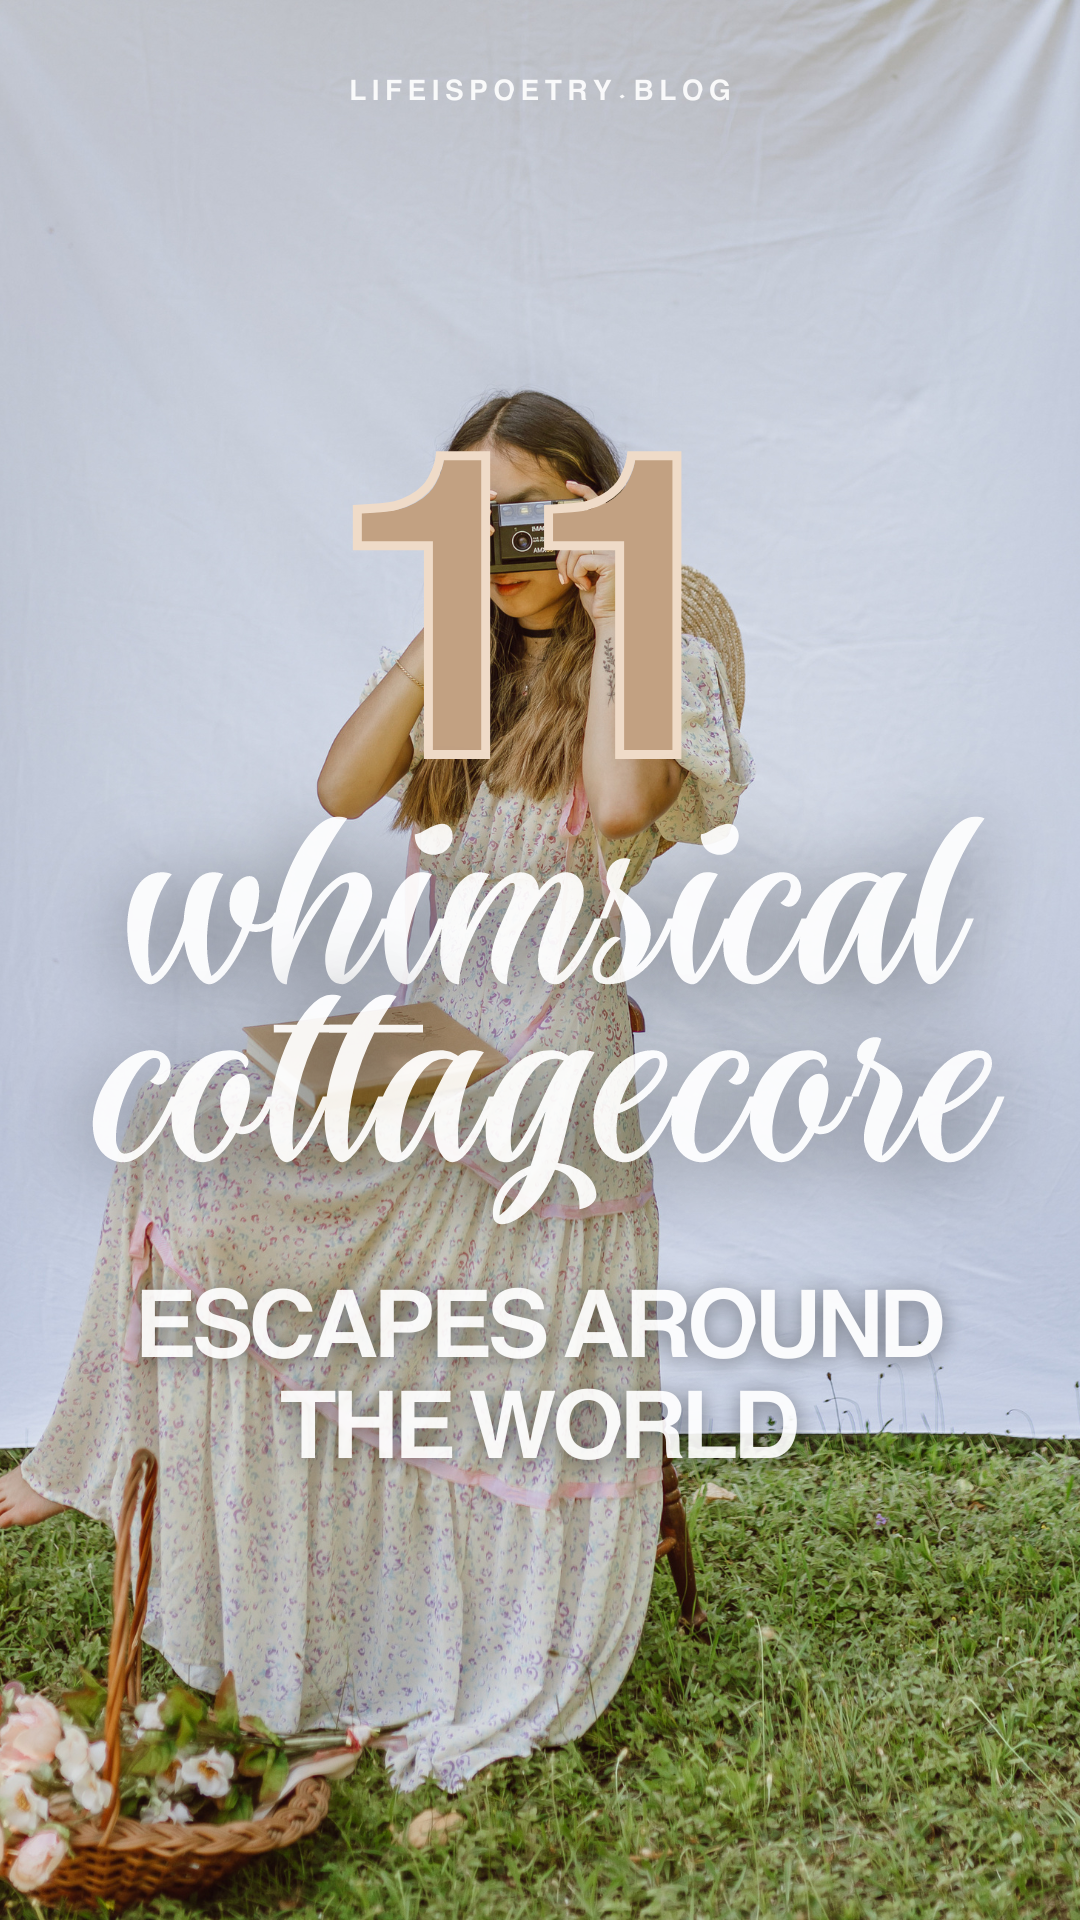 This si the feauted image, that reads the titles "11 whimsical Cottagecore escapes around the world".